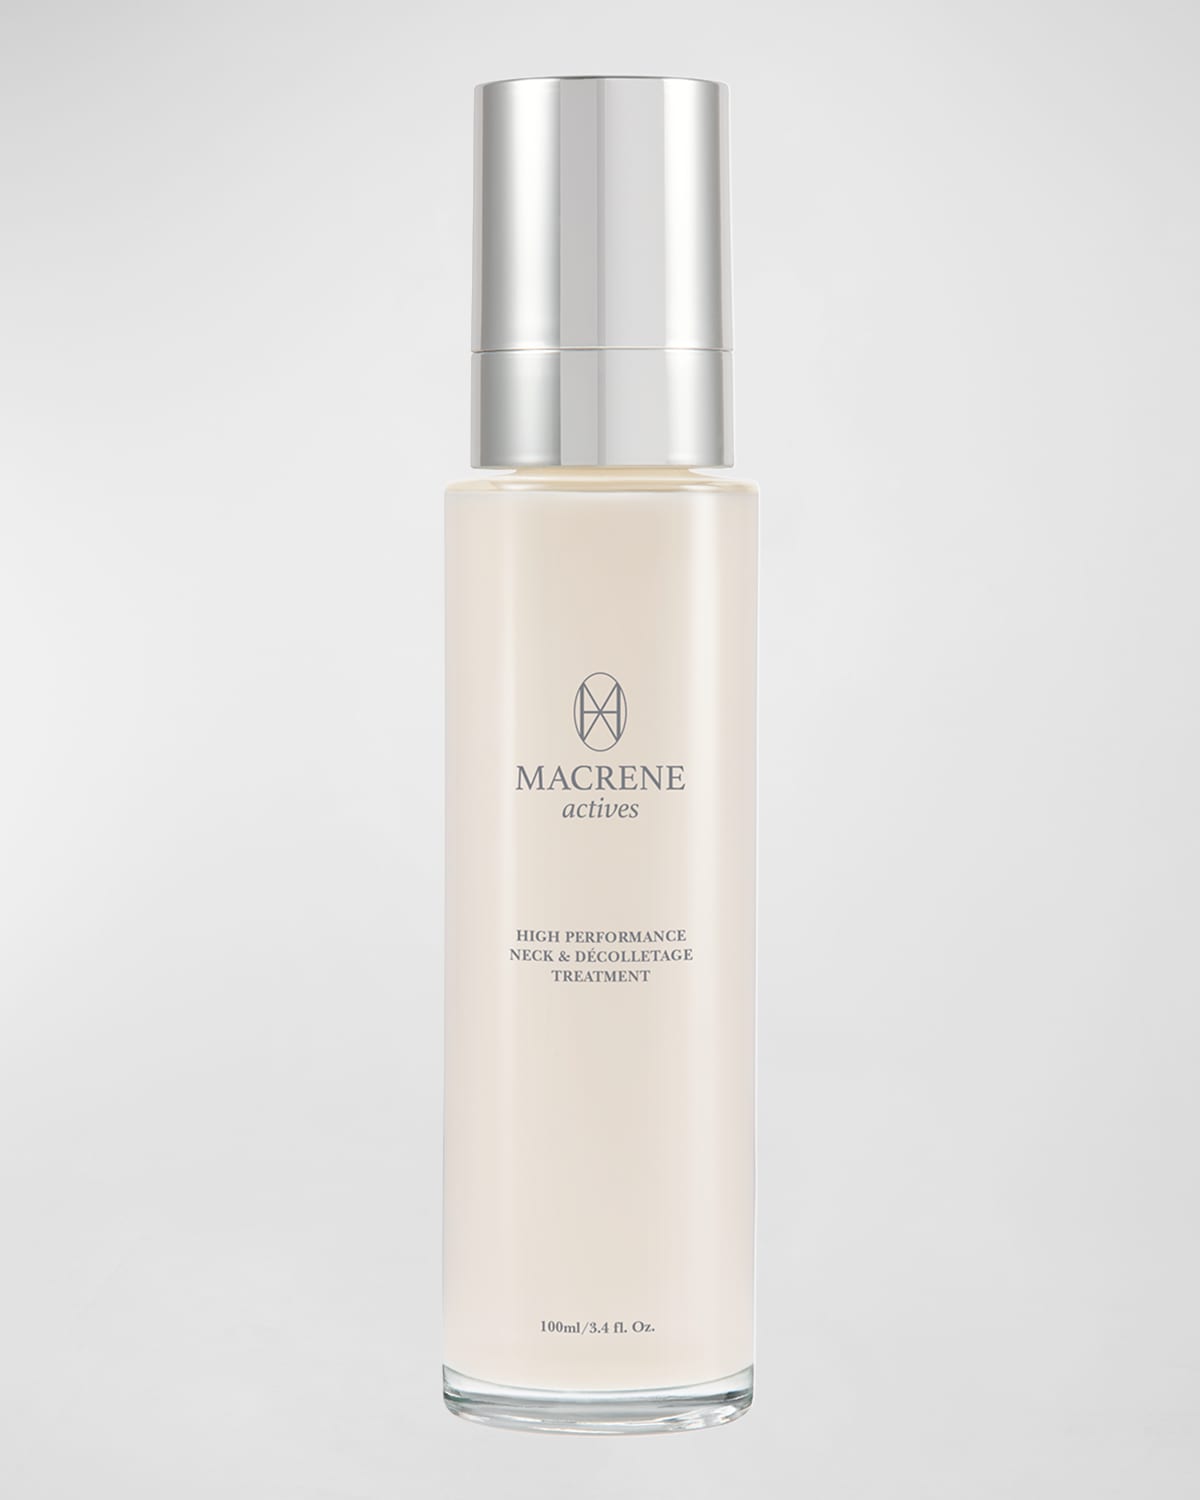 High Performance Neck and Decolletage Treatment, 3.4 oz.